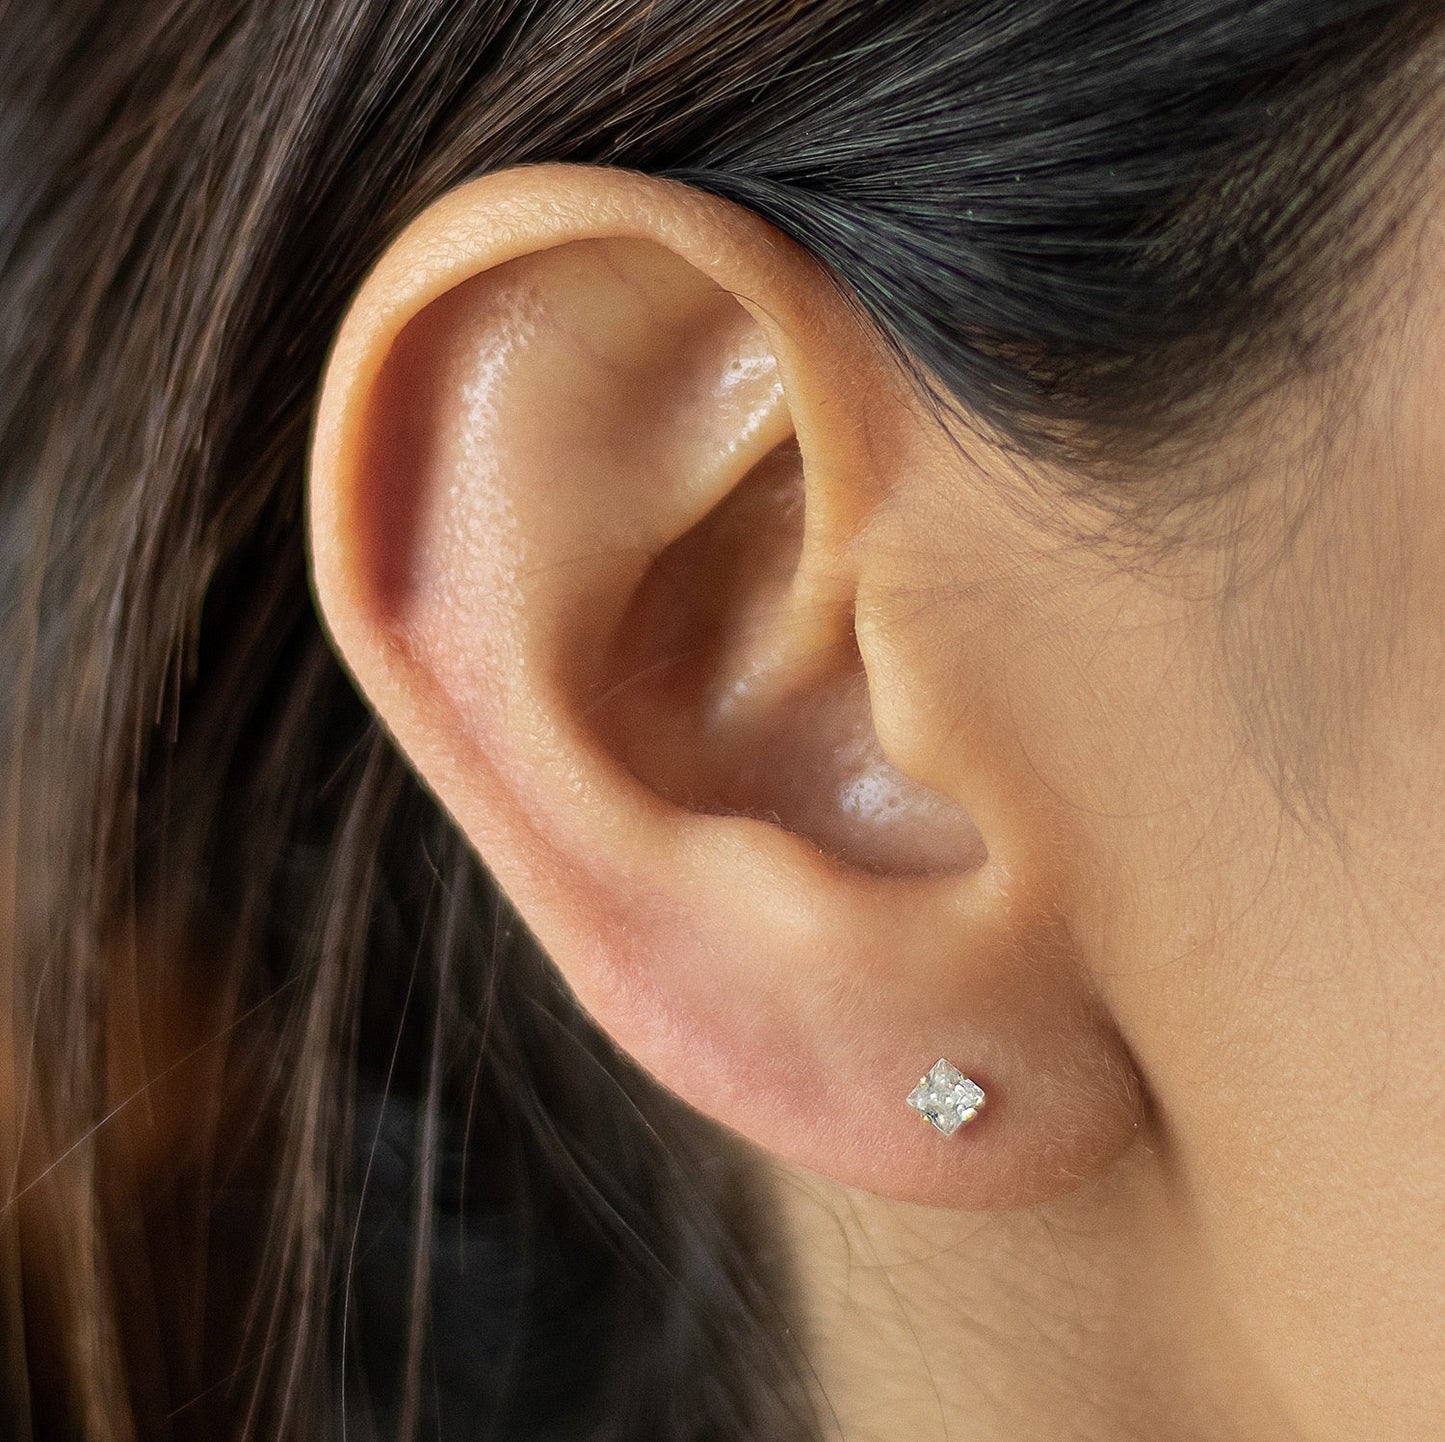 Cubic Zirconia Stud Earrings are a big hit for women. They are a great gift and will be loved by everyone.